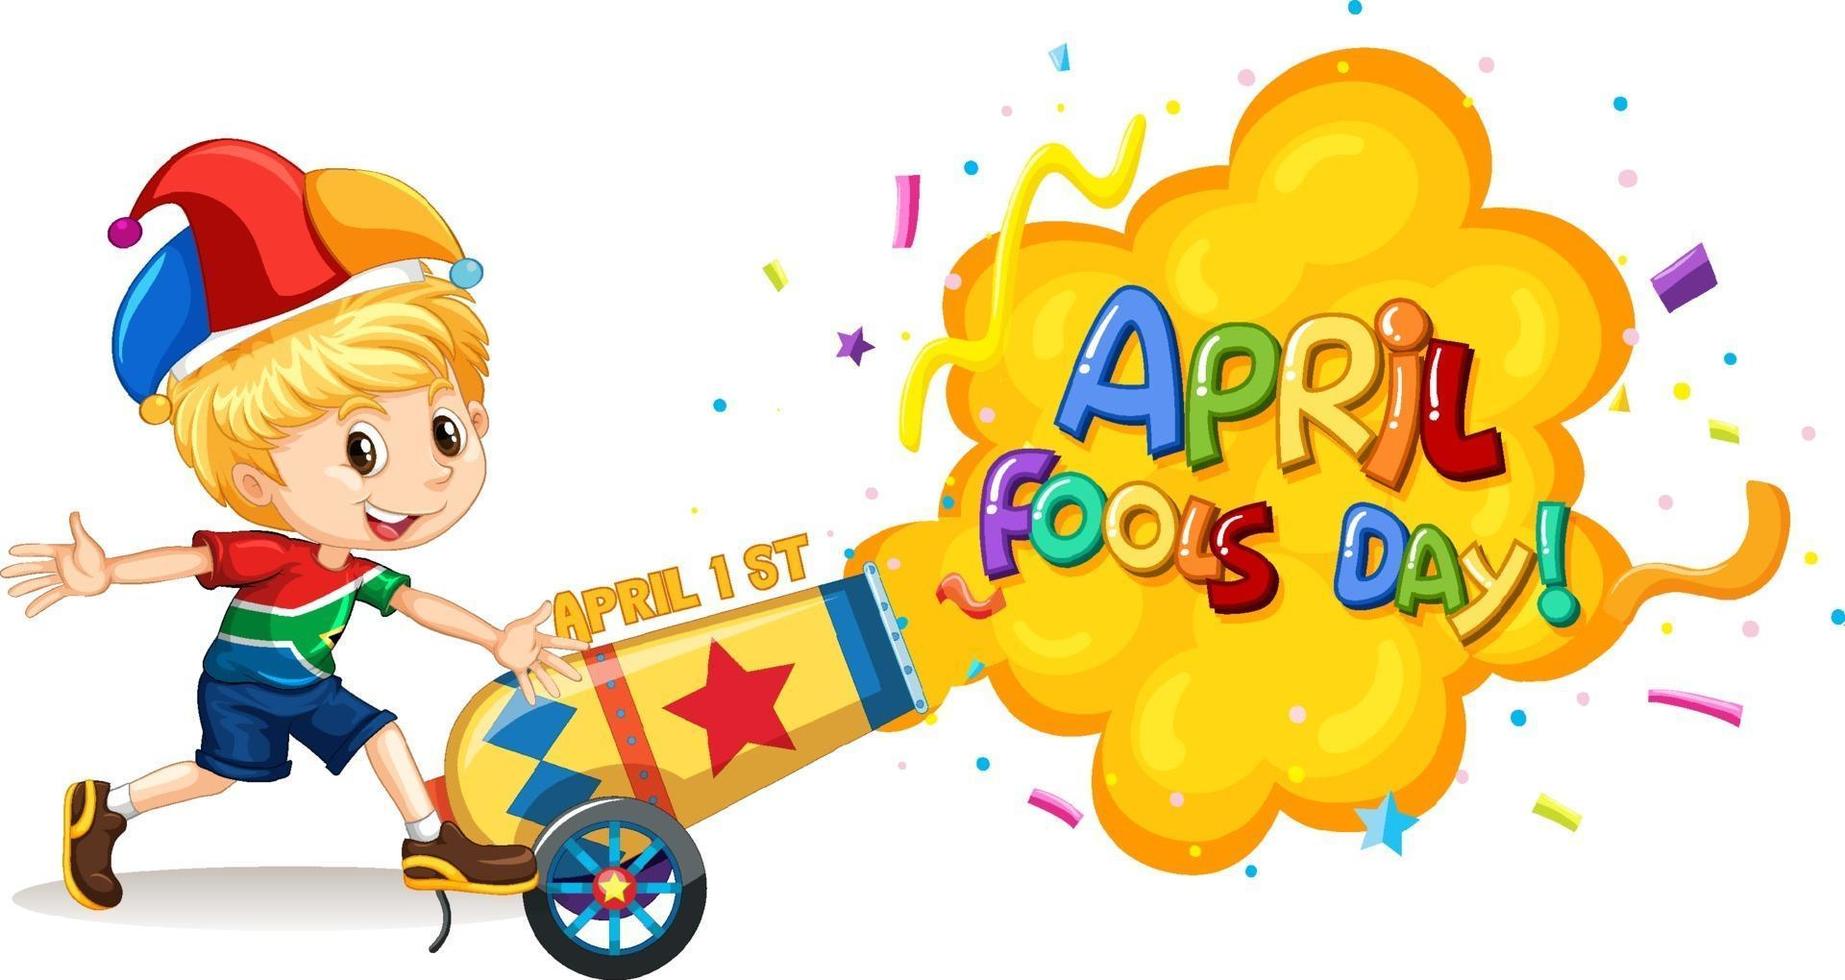 April Fool's Day font logo with a boy wearing jester hat and confetti explosion vector